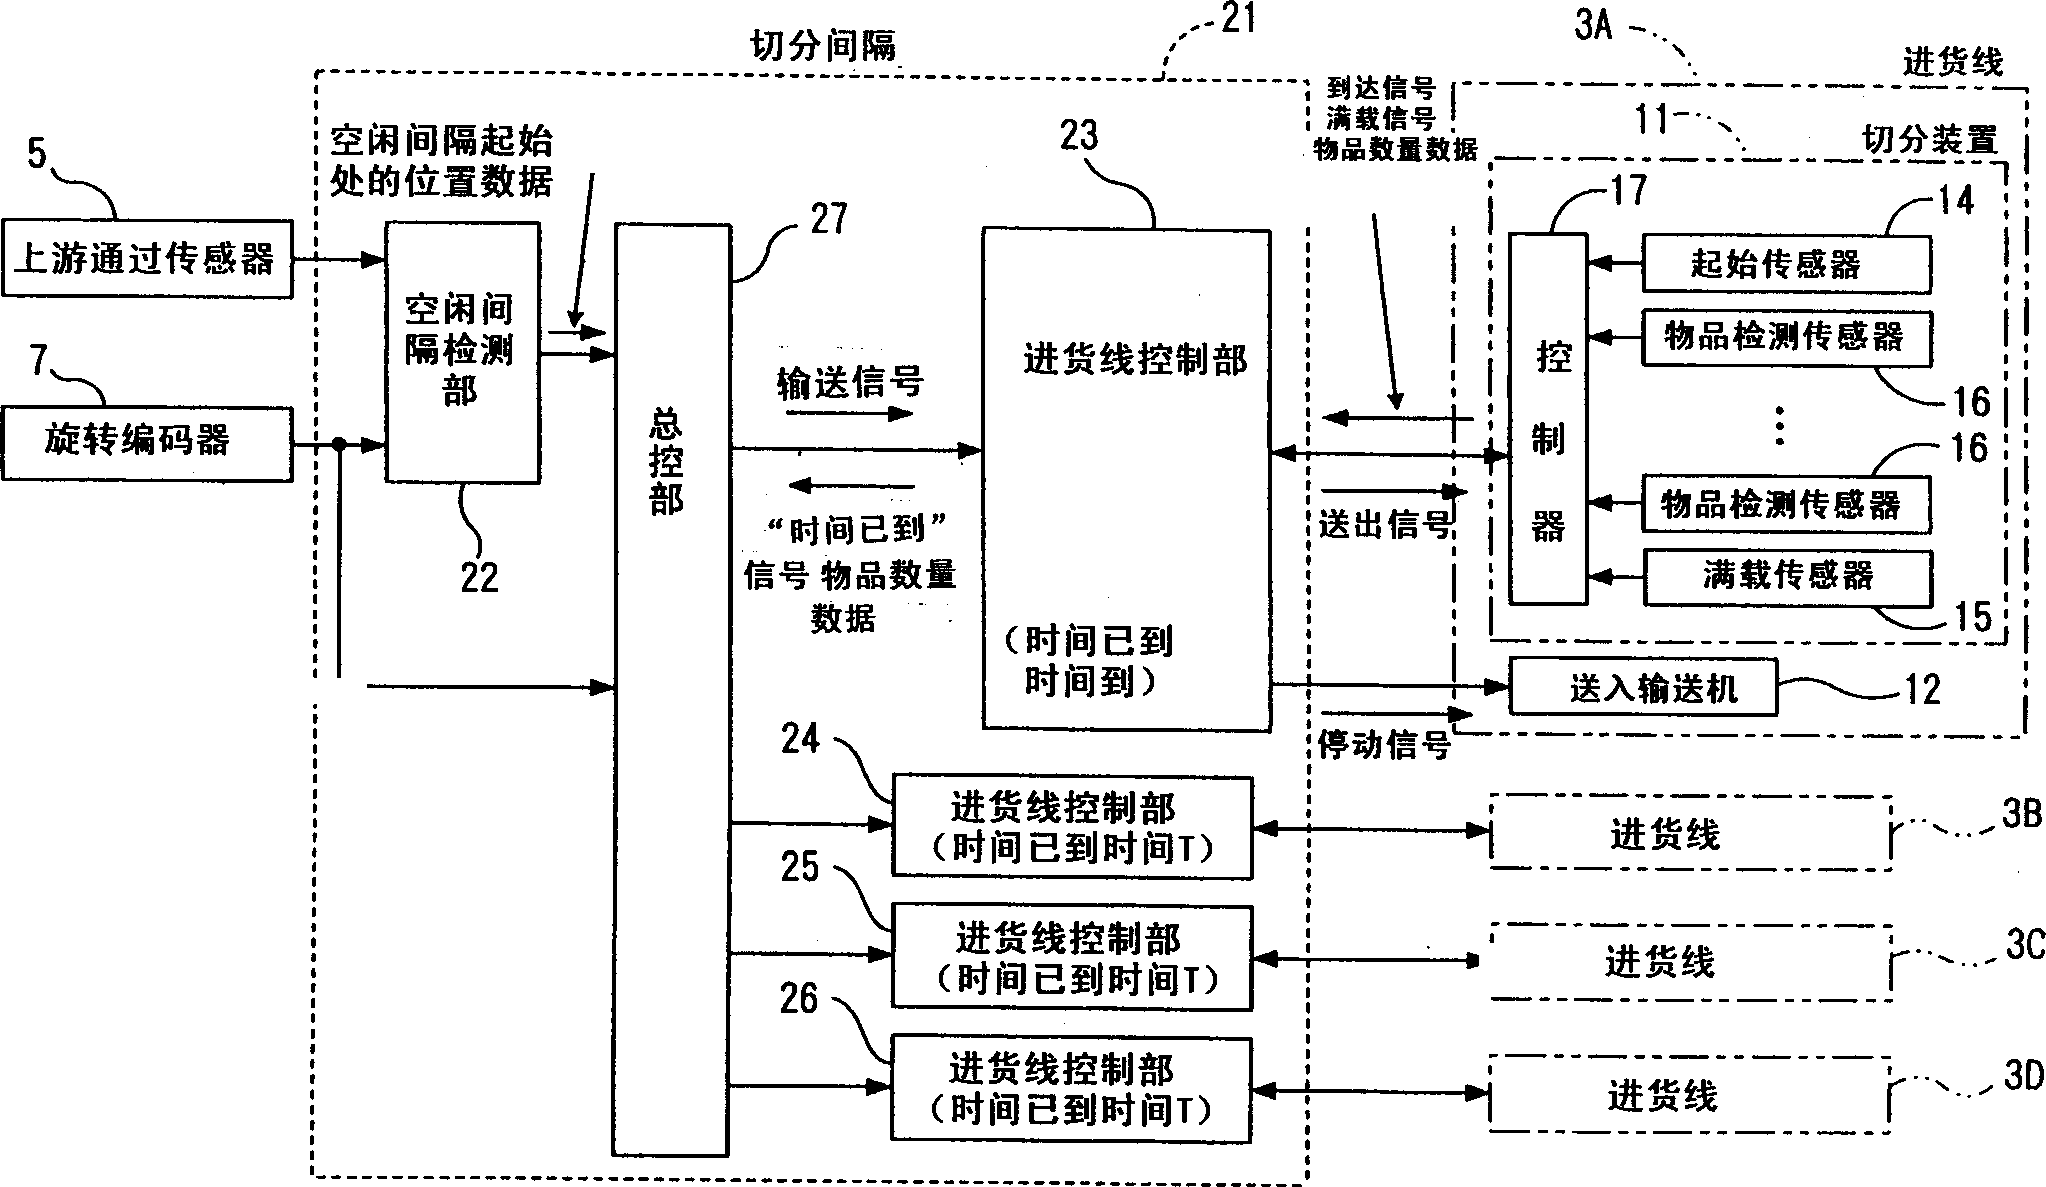 Cocurrent control method for goods